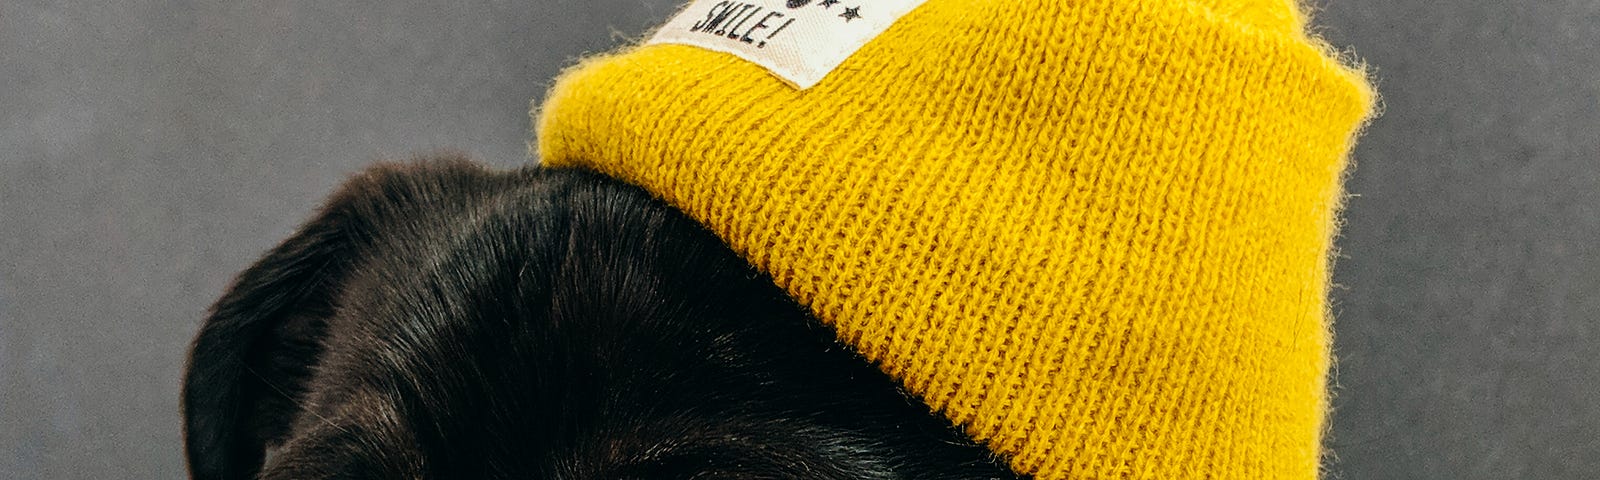 A pug wearing a bright yellow toque